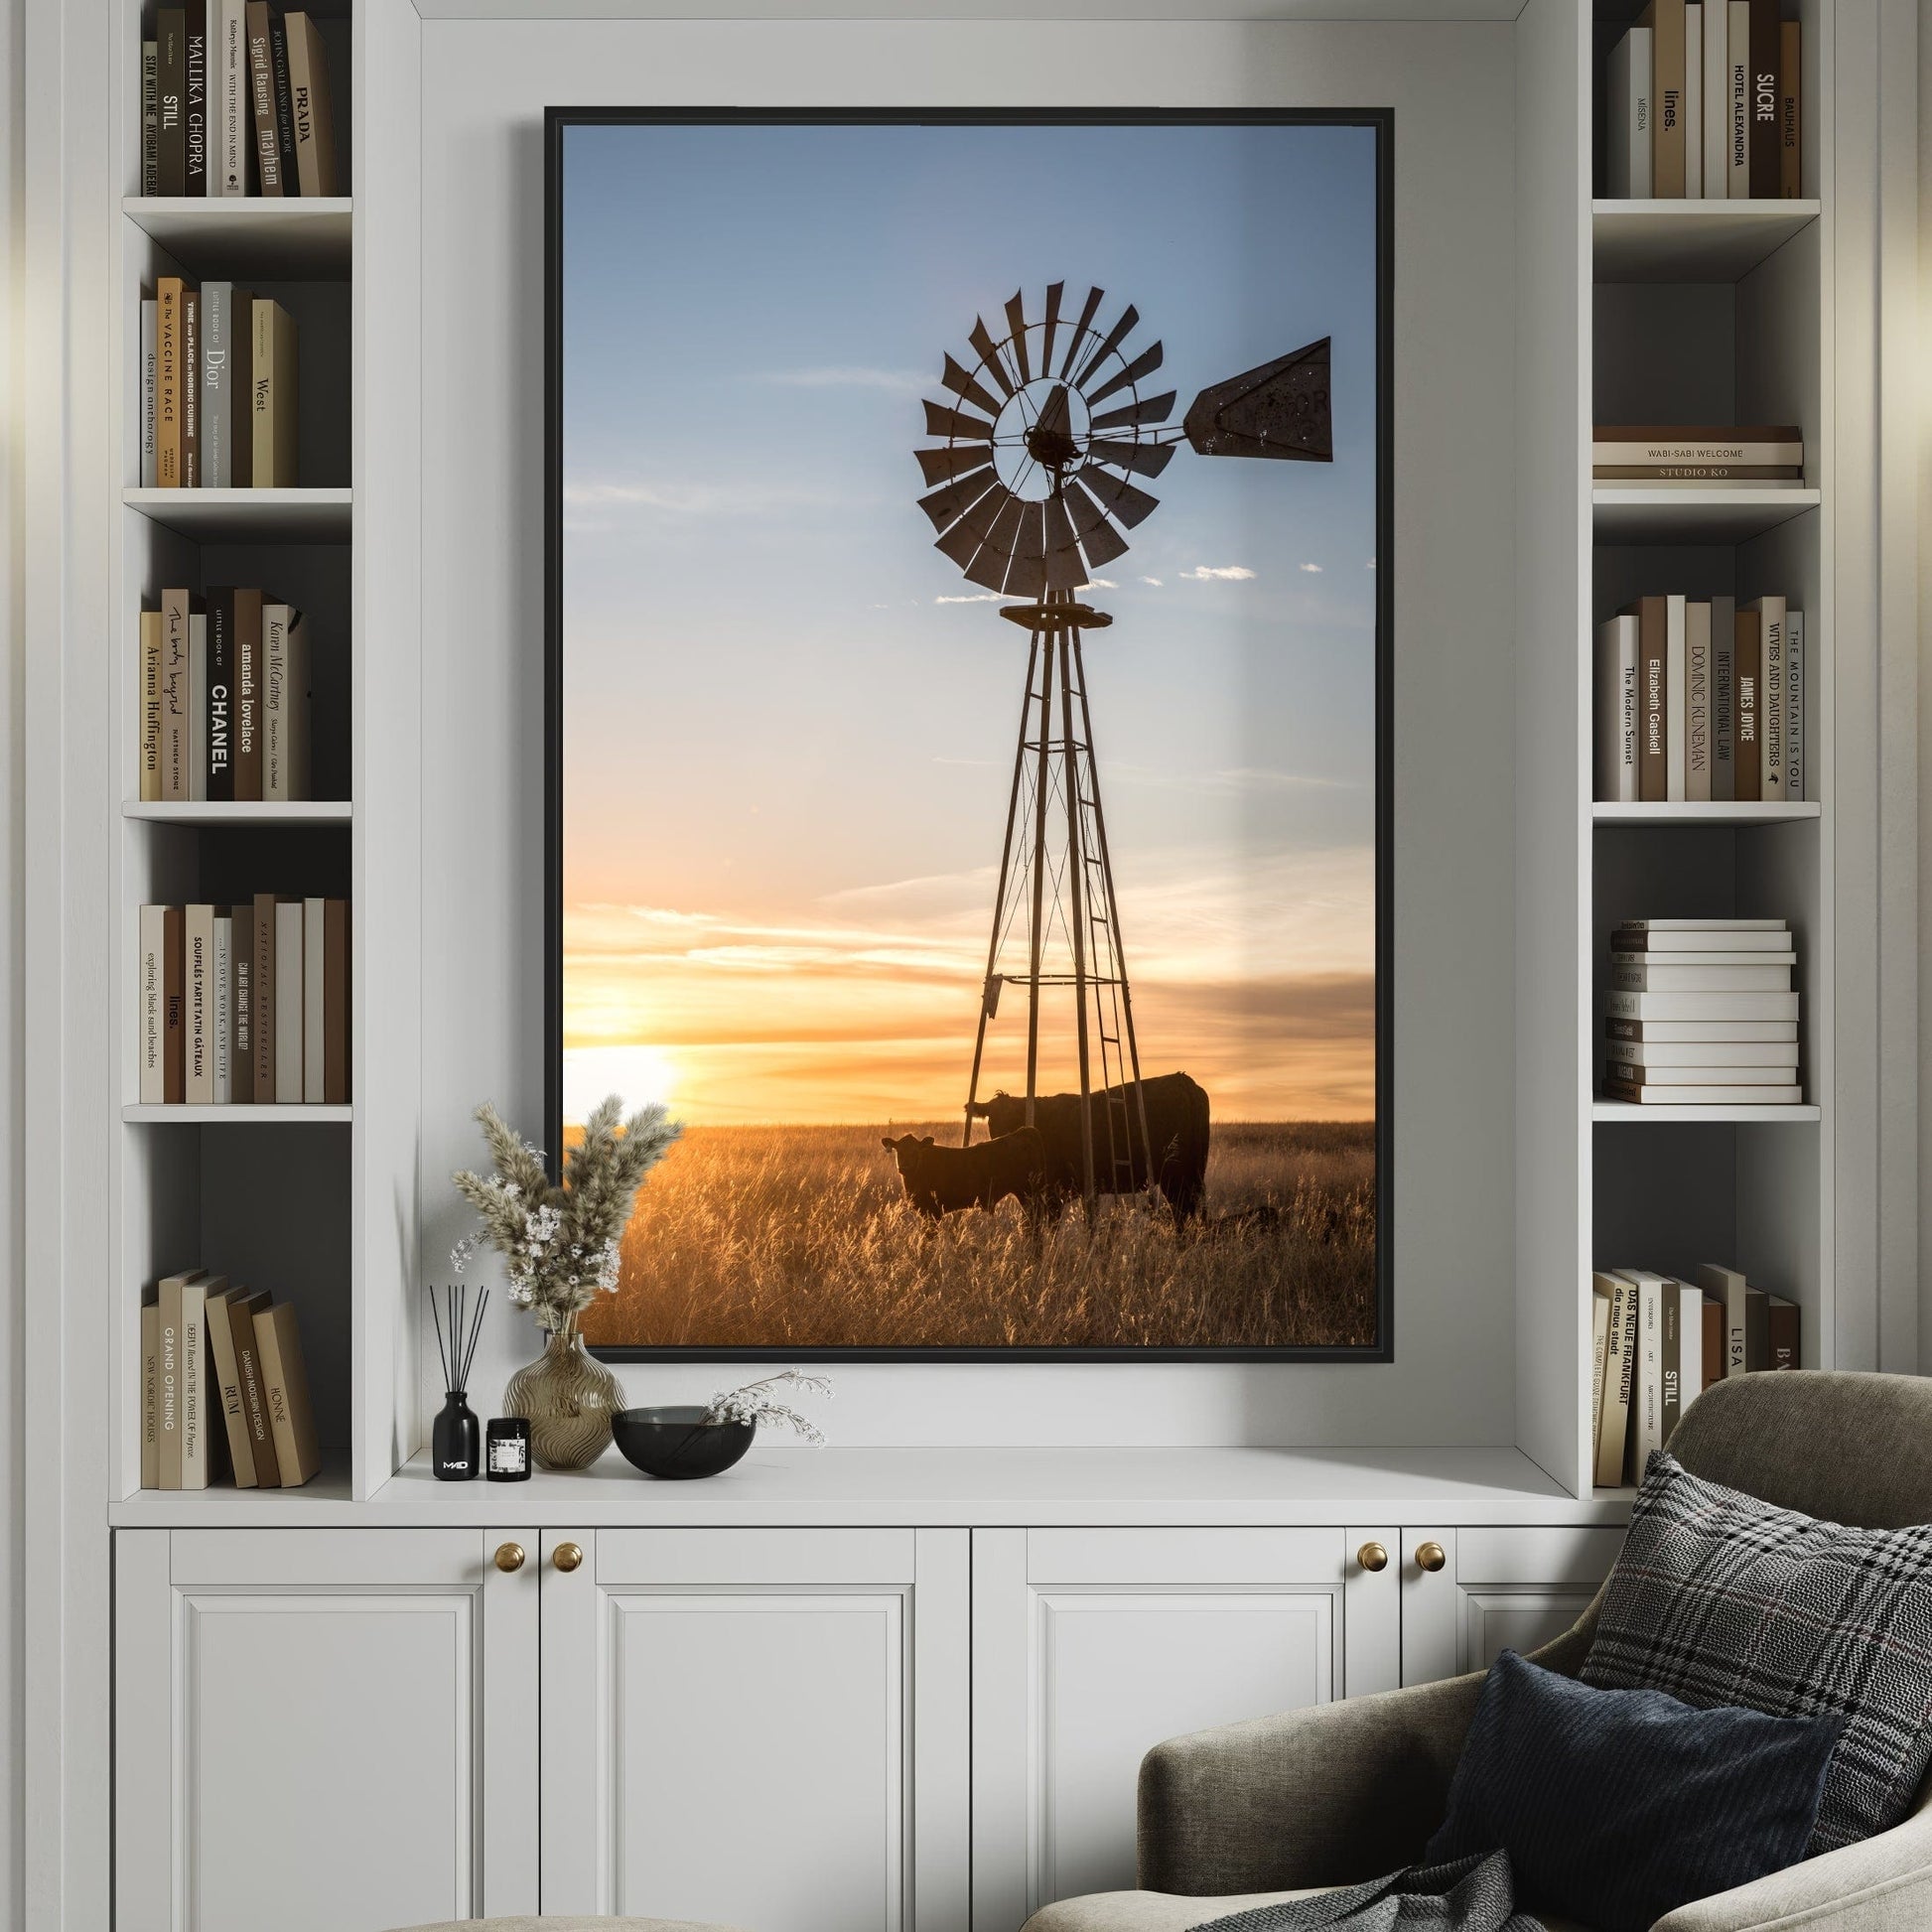 Old Windmill and Black Angus Cattle Wall Art Teri James Photography